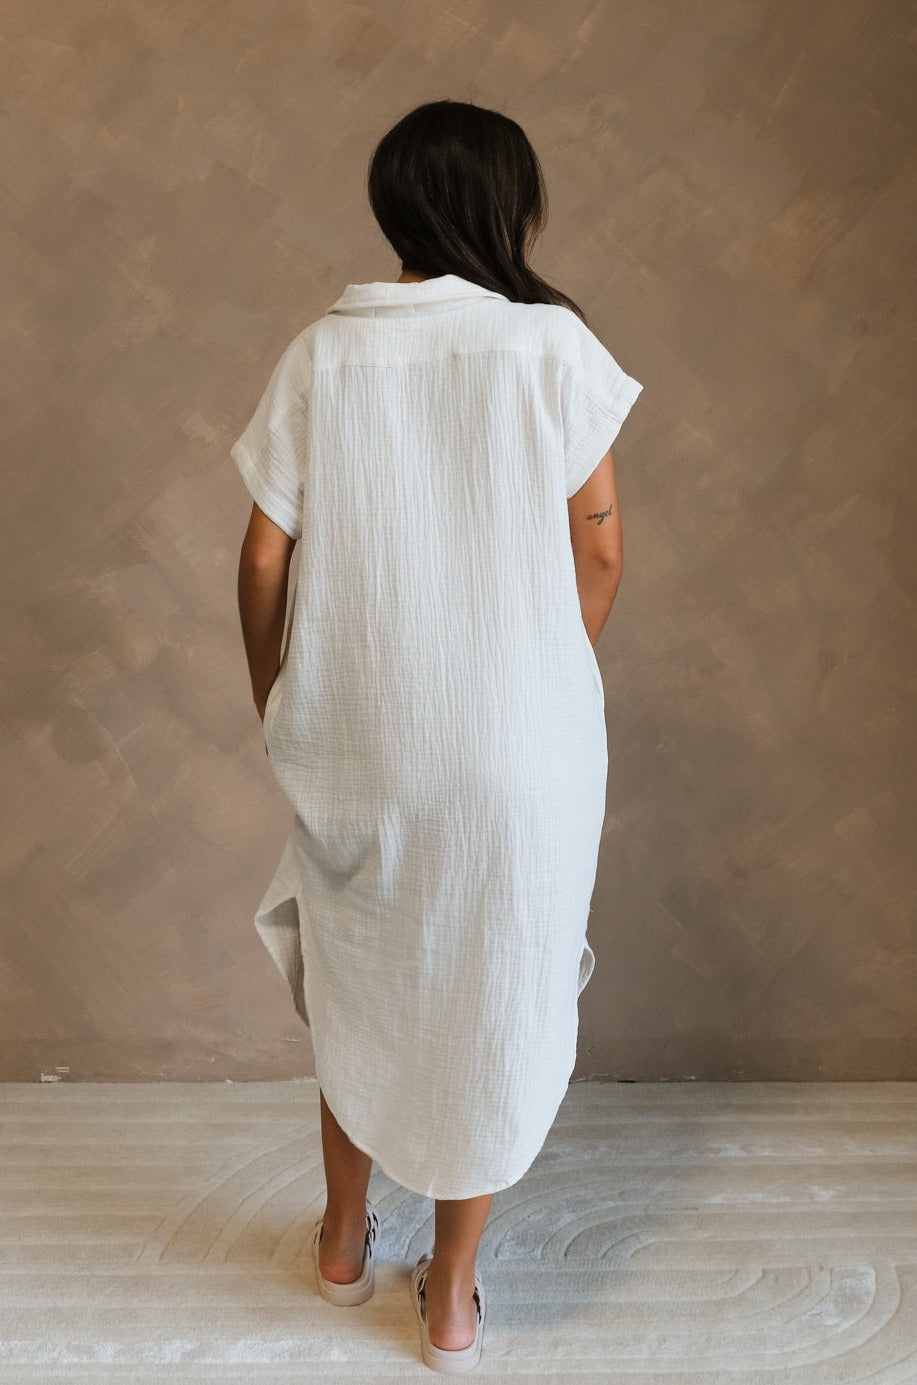 Full body back view of female model wearing the Maris White Button-Up Midi Dress that has white gauze fabric, button up front, short sleeves, and a collar. Worn white white sandals.